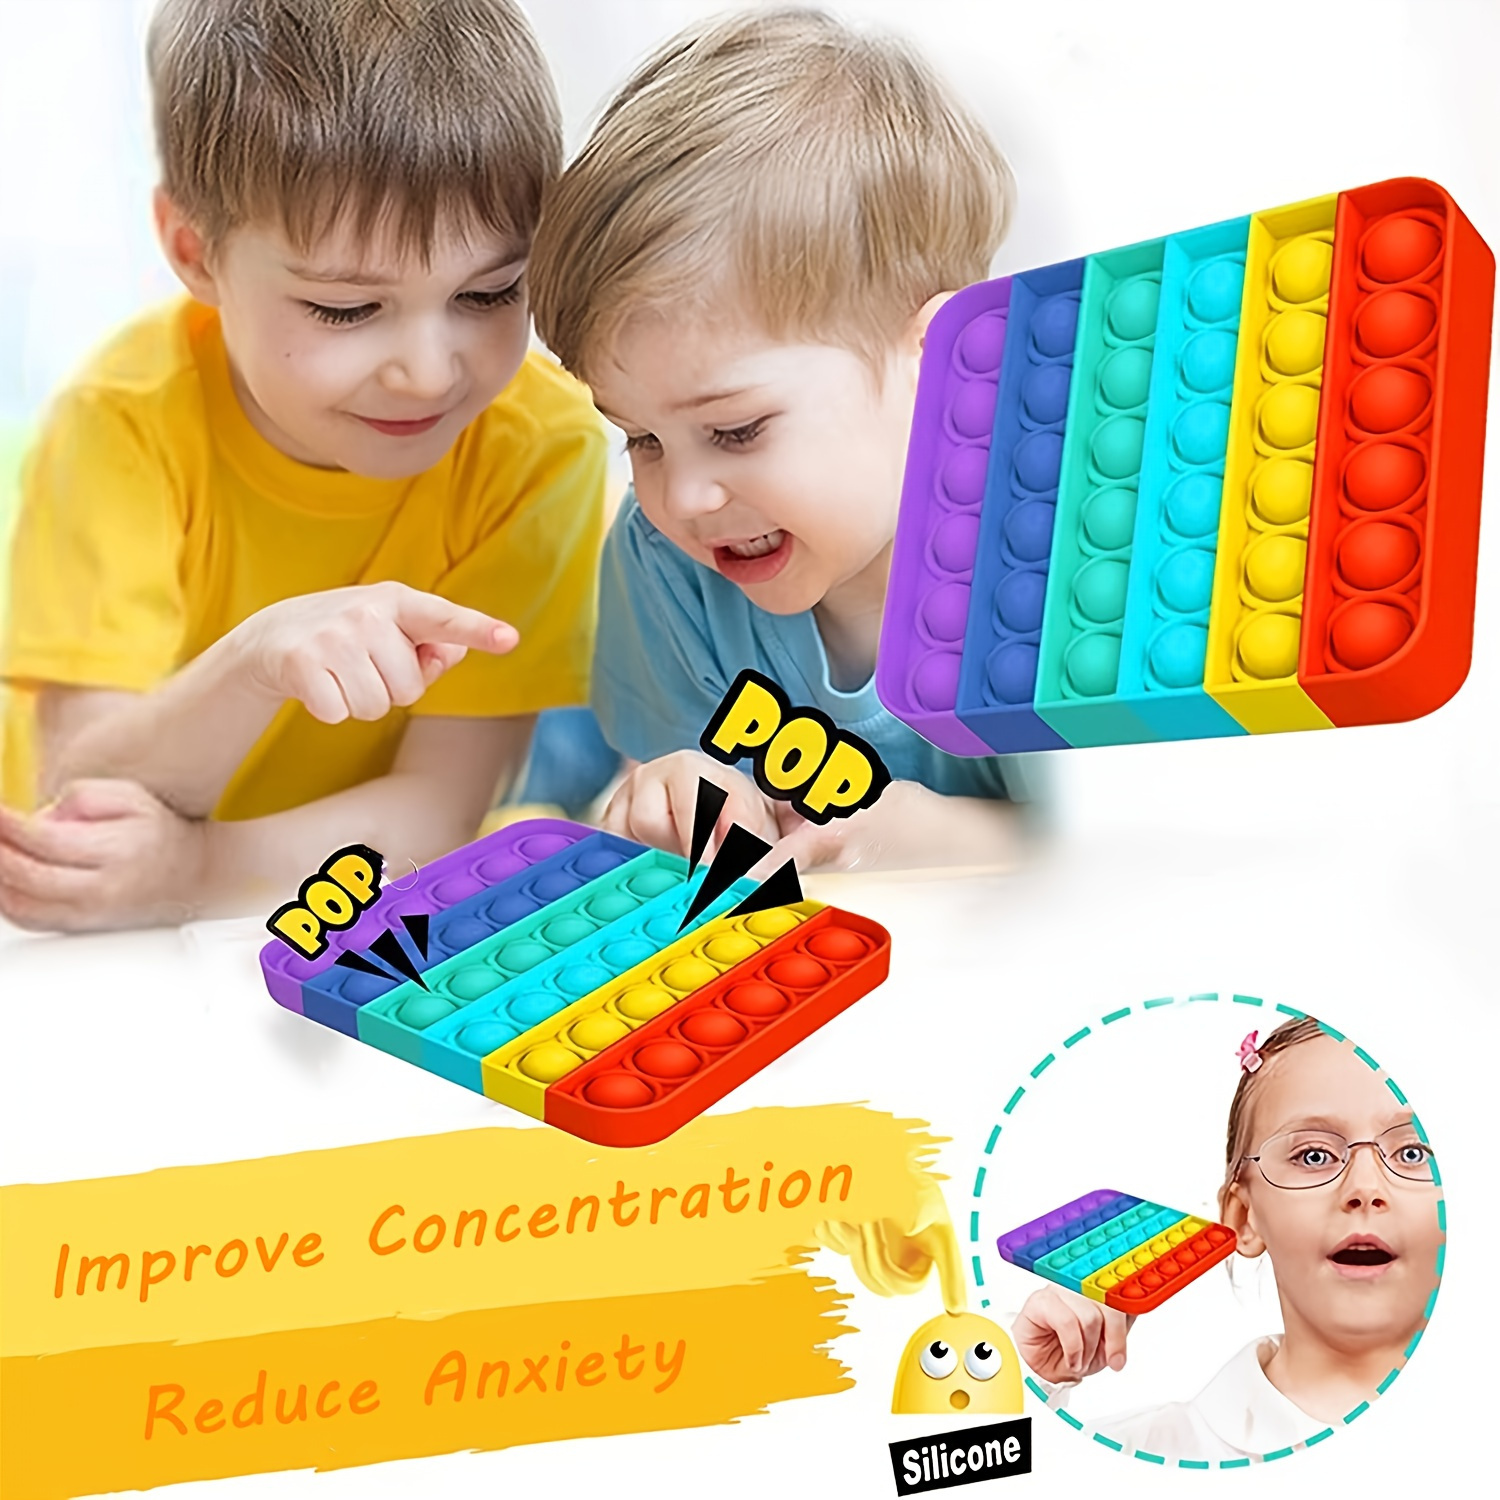 Push Pop Bubble Sensory Fidget Toys Stress Relief Silicone Pressure  Relieving Popping it Toys for Autism Special Needs Anxiety Reliever for  Kids Teens